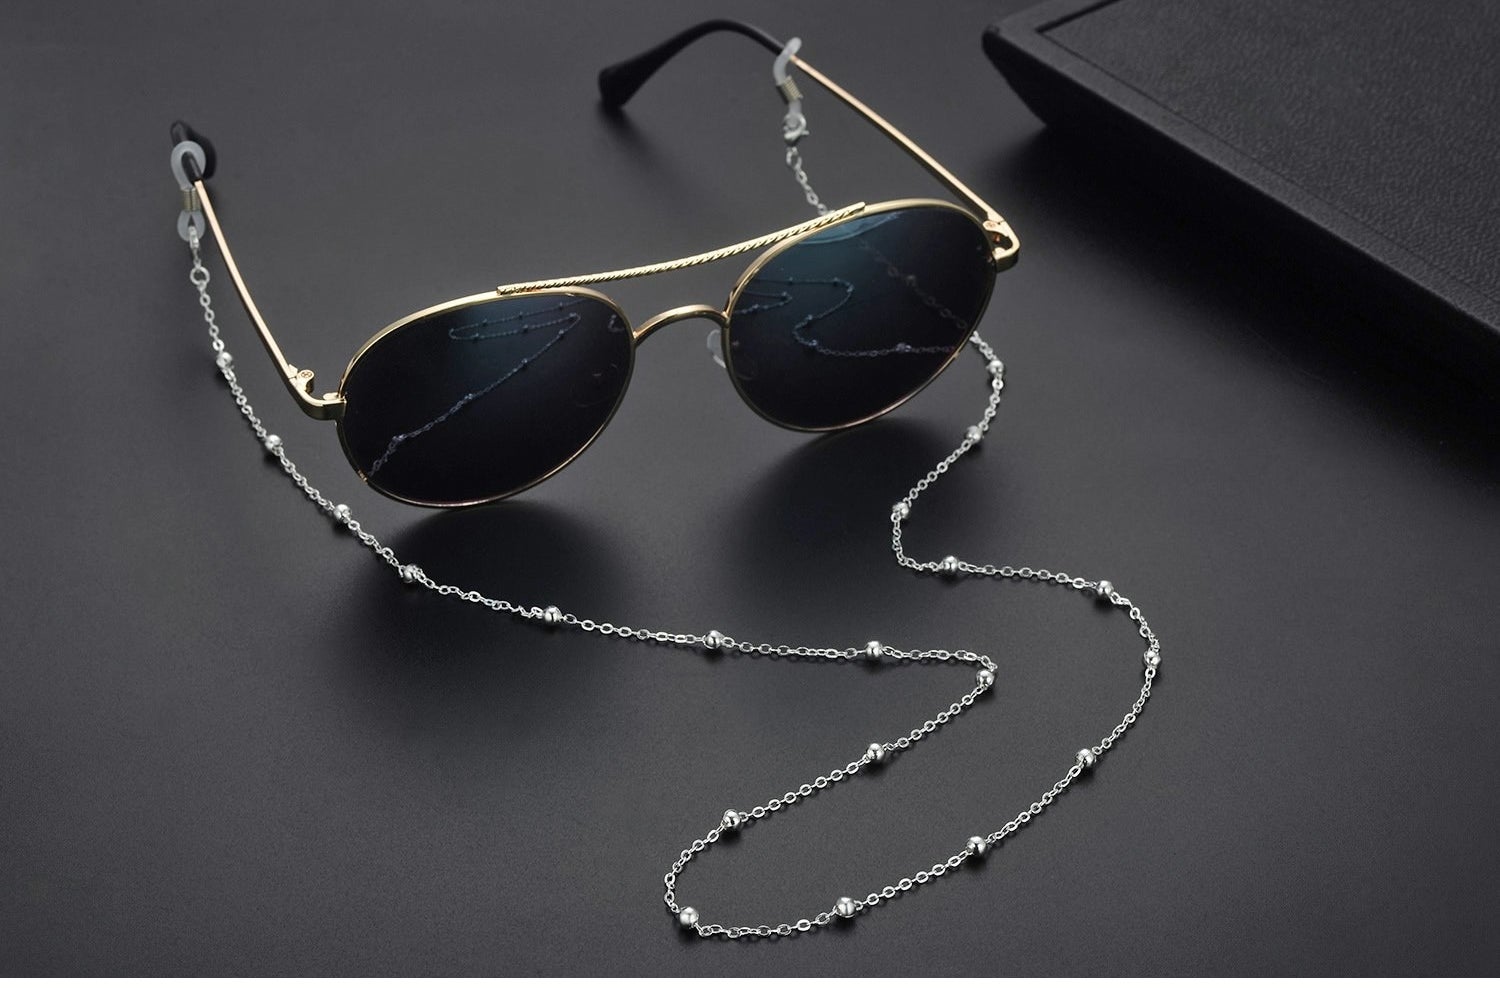 Sunglasses with the chain attached to the arms